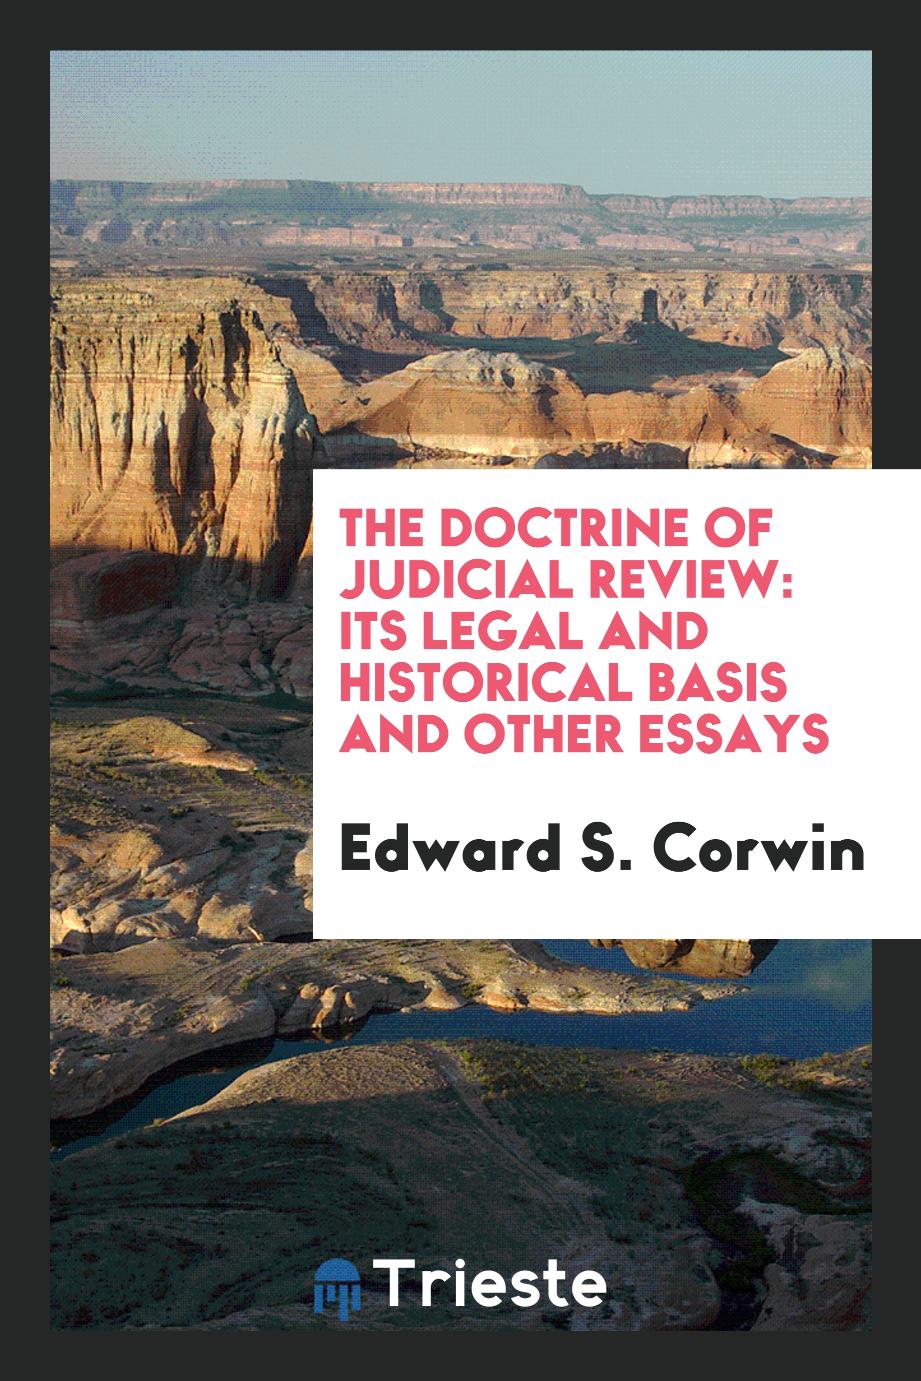 Edward S. Corwin - The Doctrine of Judicial Review: Its Legal and Historical Basis and Other Essays